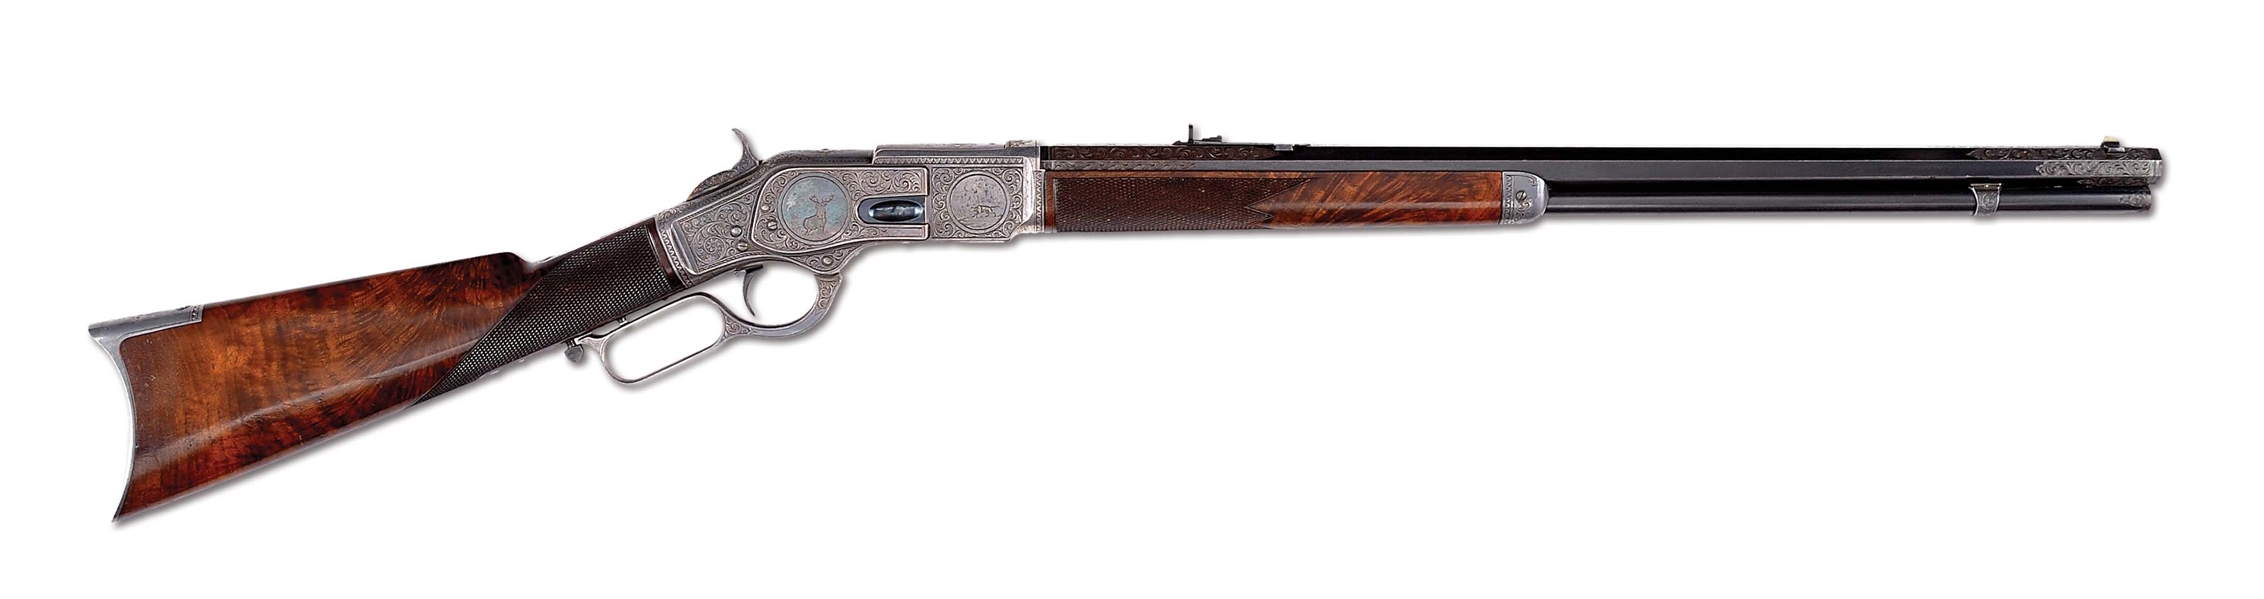 (A) EXCEPTIONAL J. ULRICH SIGNED WINCHESTER 1873 DELUXE 1ST MODEL RIFLE (1877).